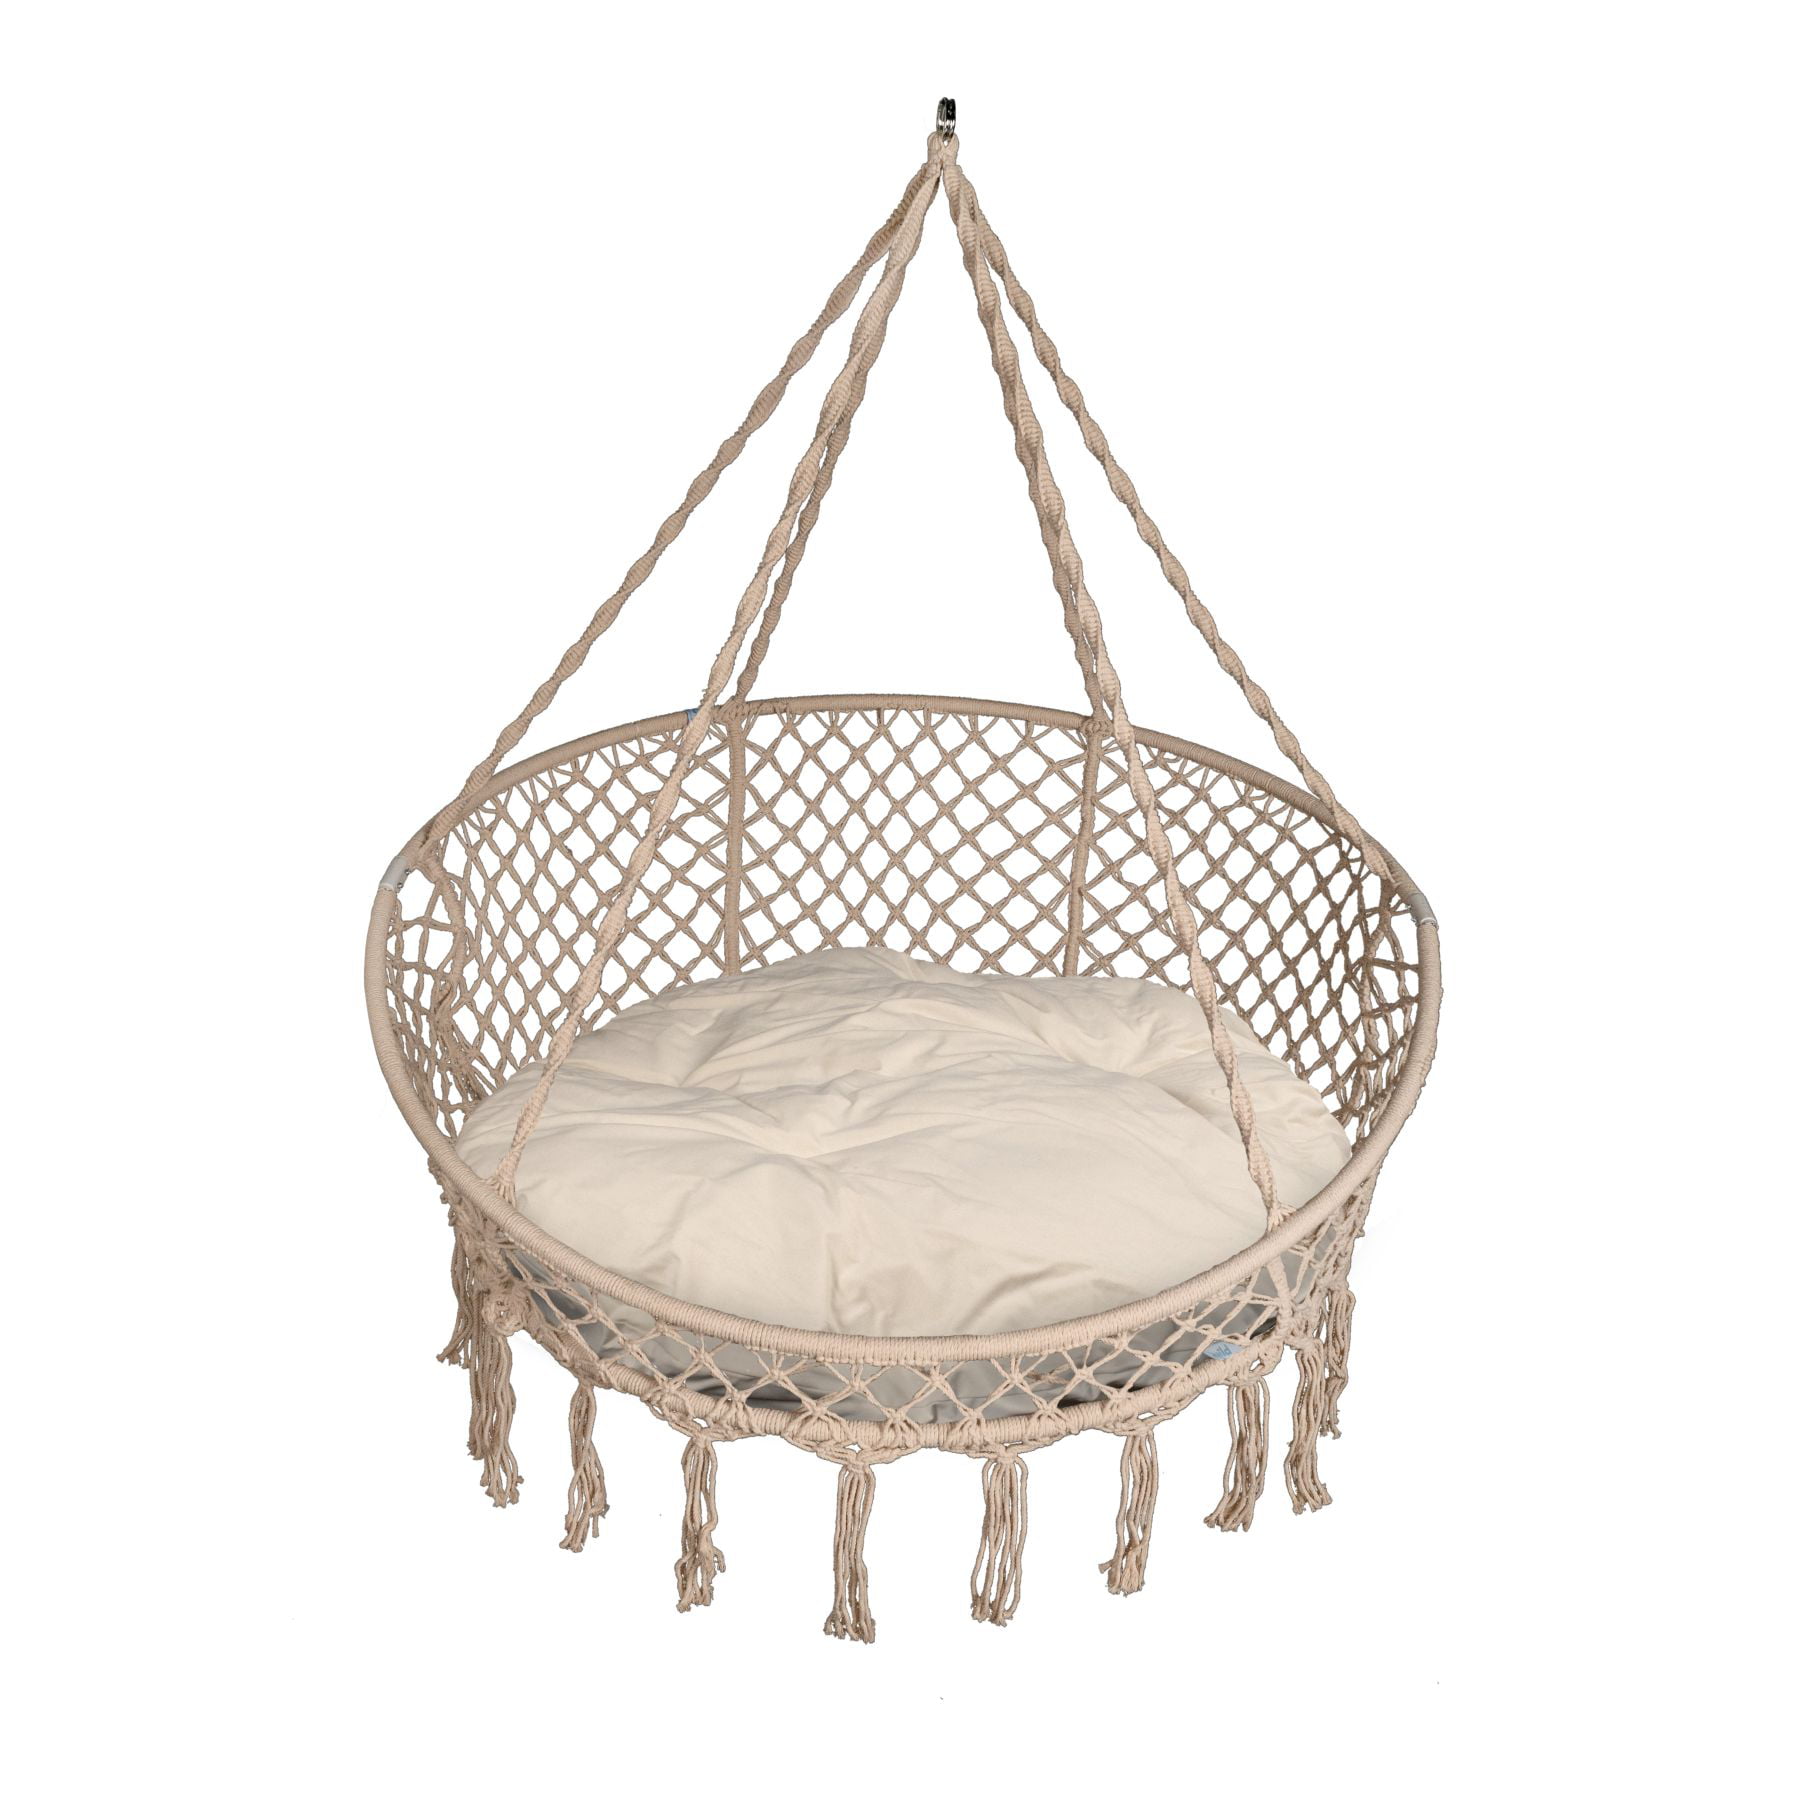 PerfectPatio Macrame Hanging Hammock Chair with Pillows